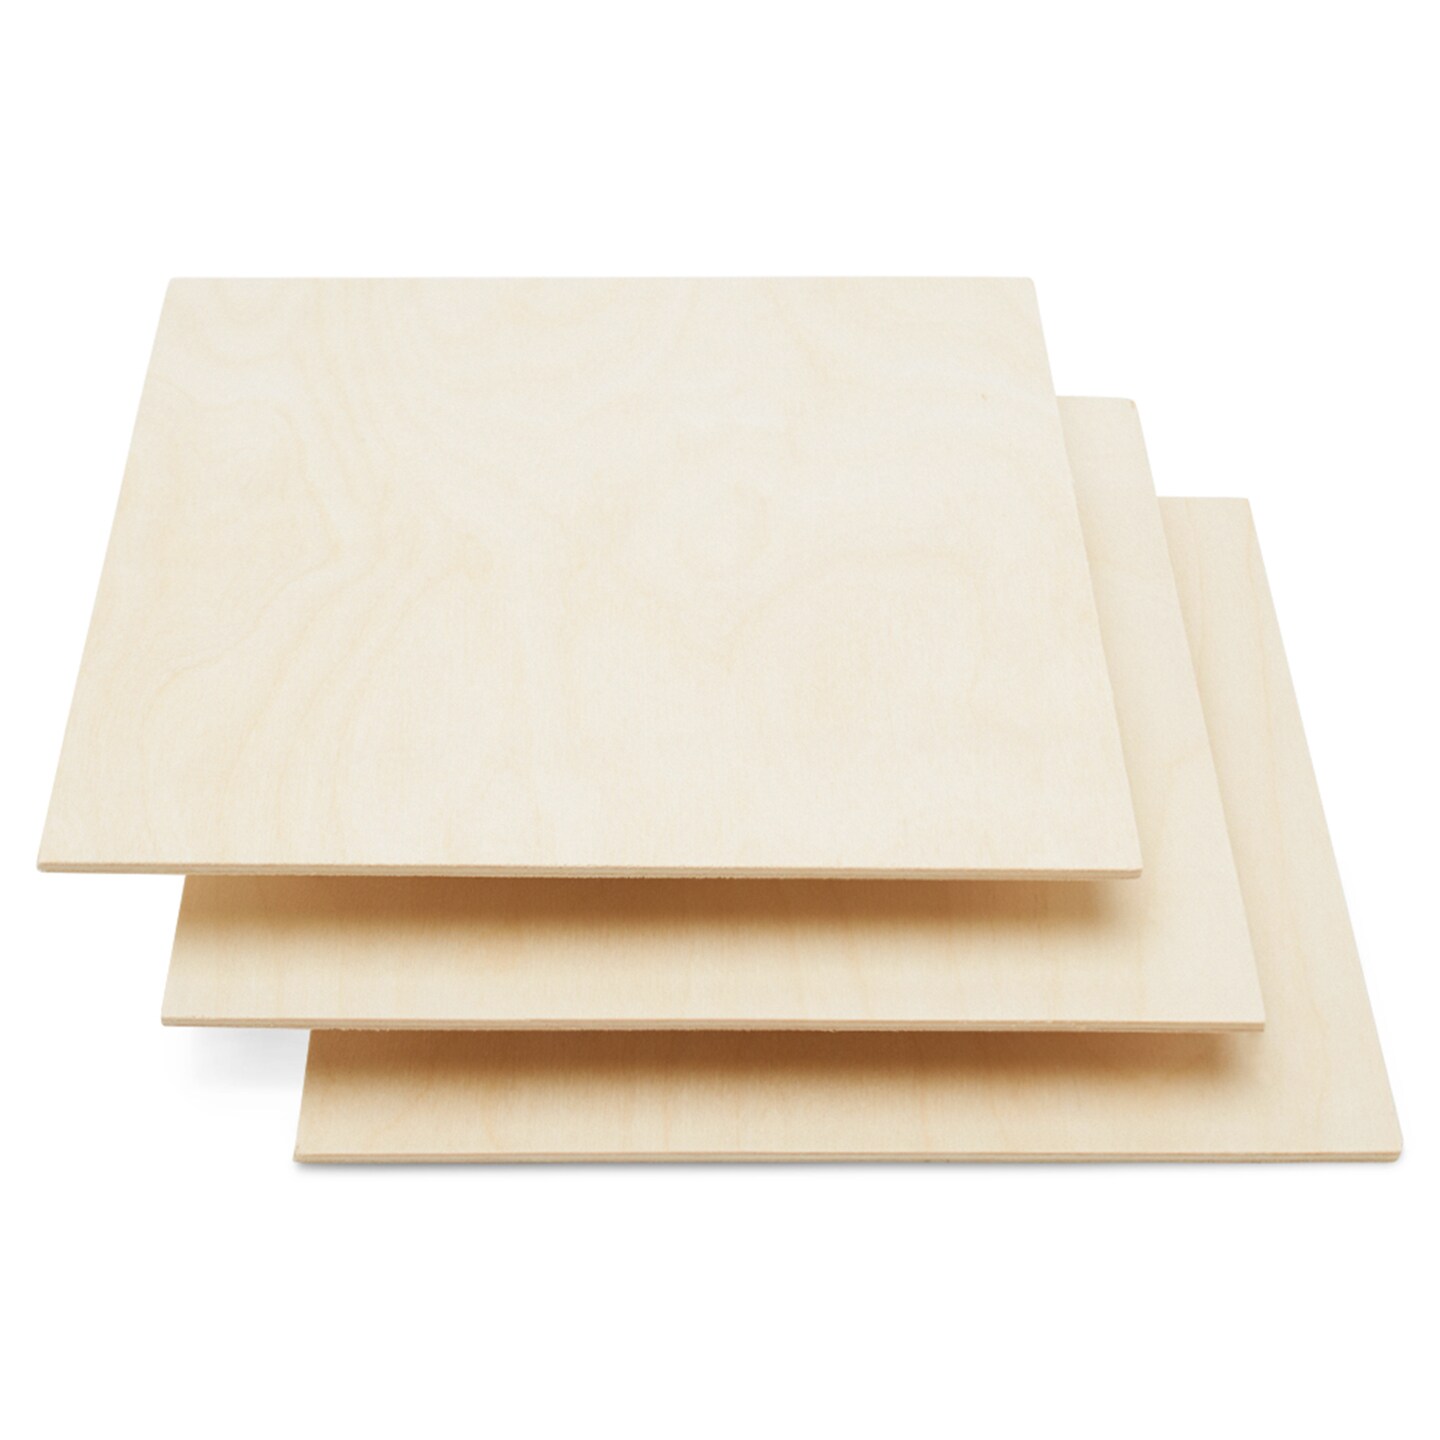 Baltic Birch Plywood, 24 x 24 Inch, B/BB Grade Sheets, 1/4 or 1/8 Inch  Thick, Woodpeckers